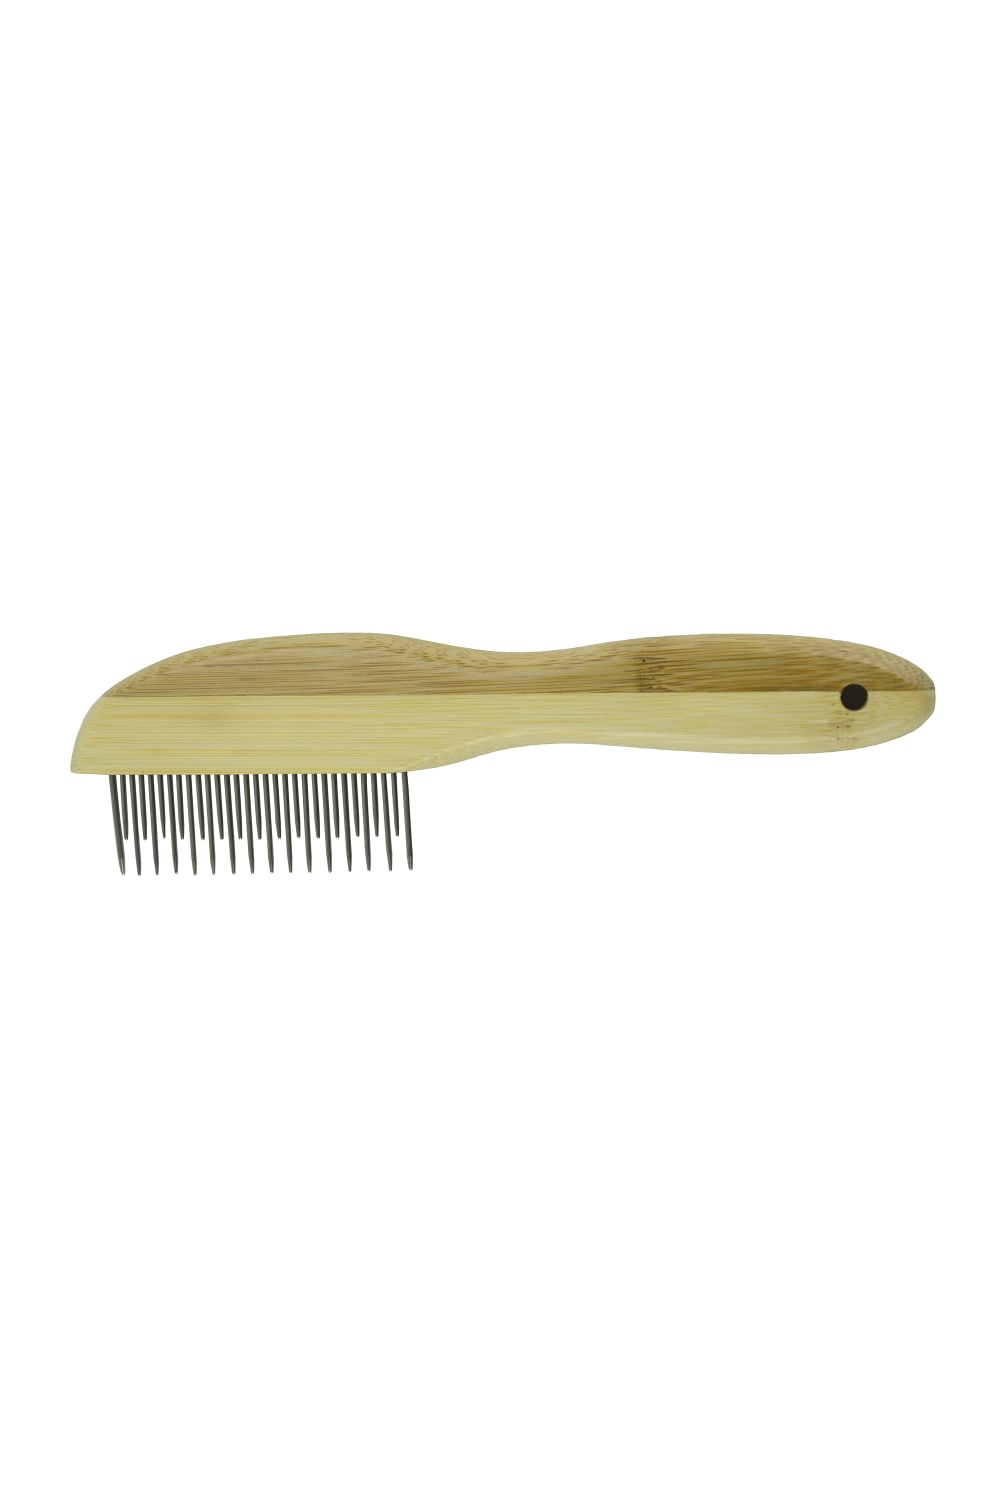 Pawise Detangling Dog Grooming Comb (Brown) (21 Pins)